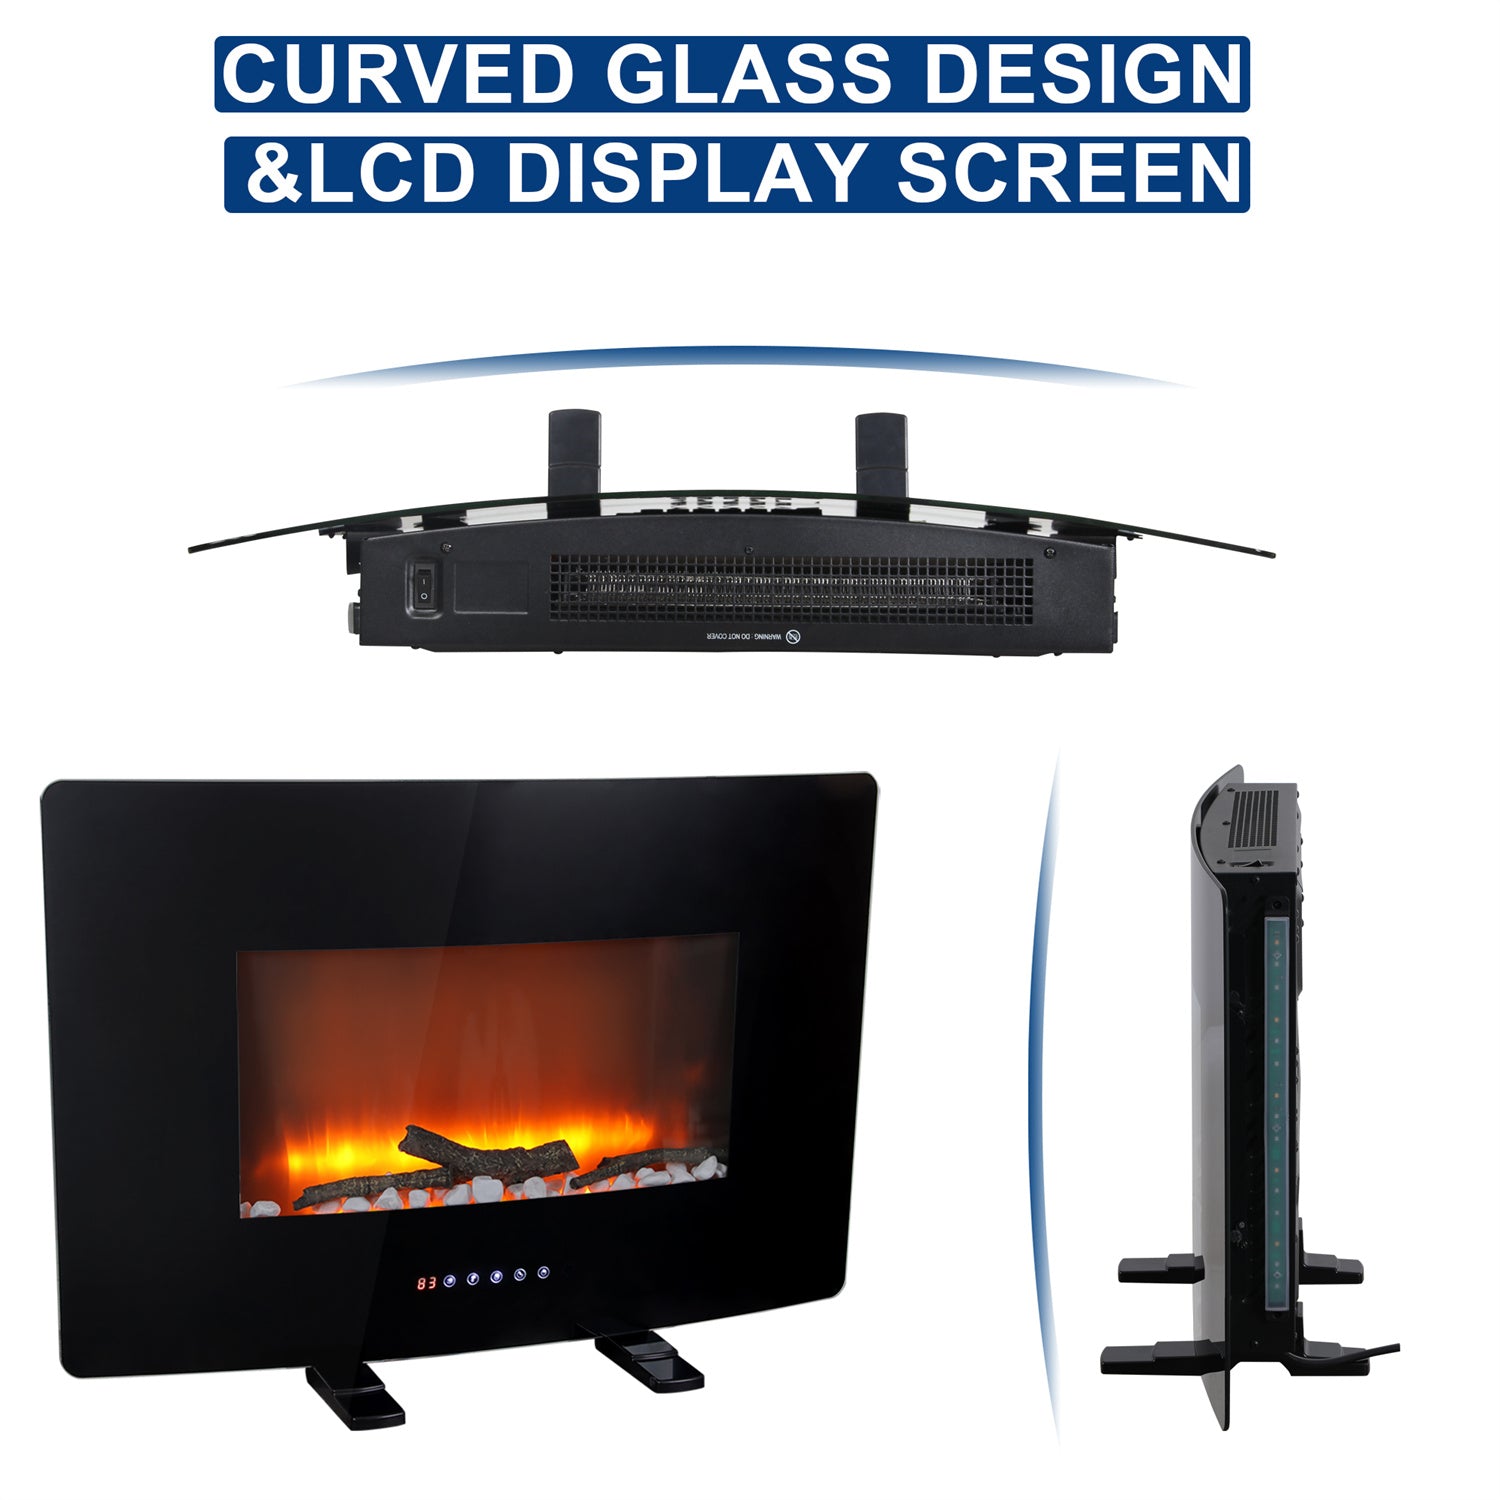 MFSTUDIO 30" Electric Fireplace, Wall Mounted & Freestanding Electric Fireplace Heater Curved, 700W/1400W